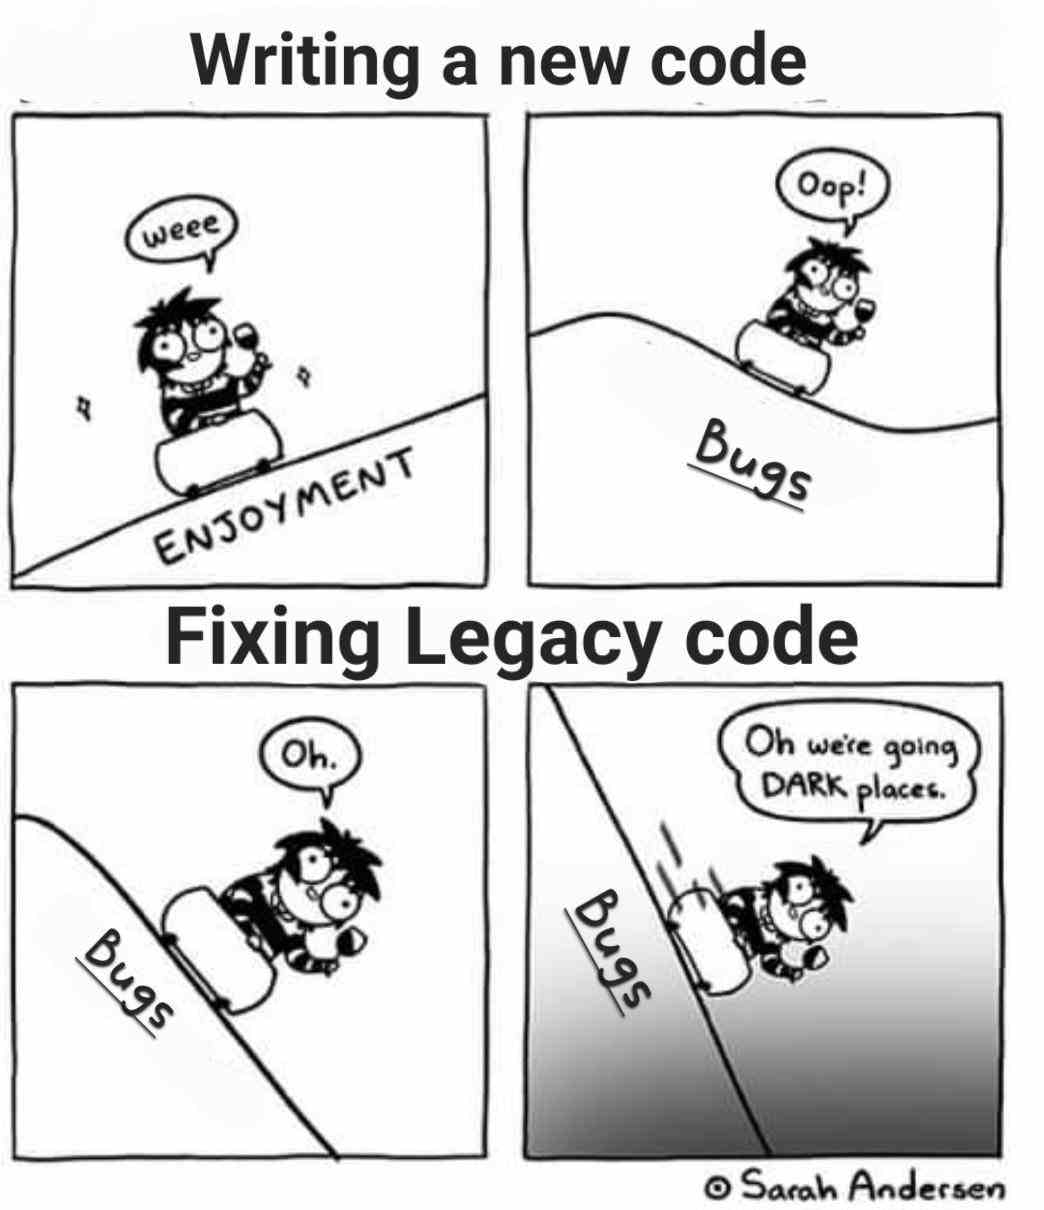 Writing a new code & Fixing legacy code